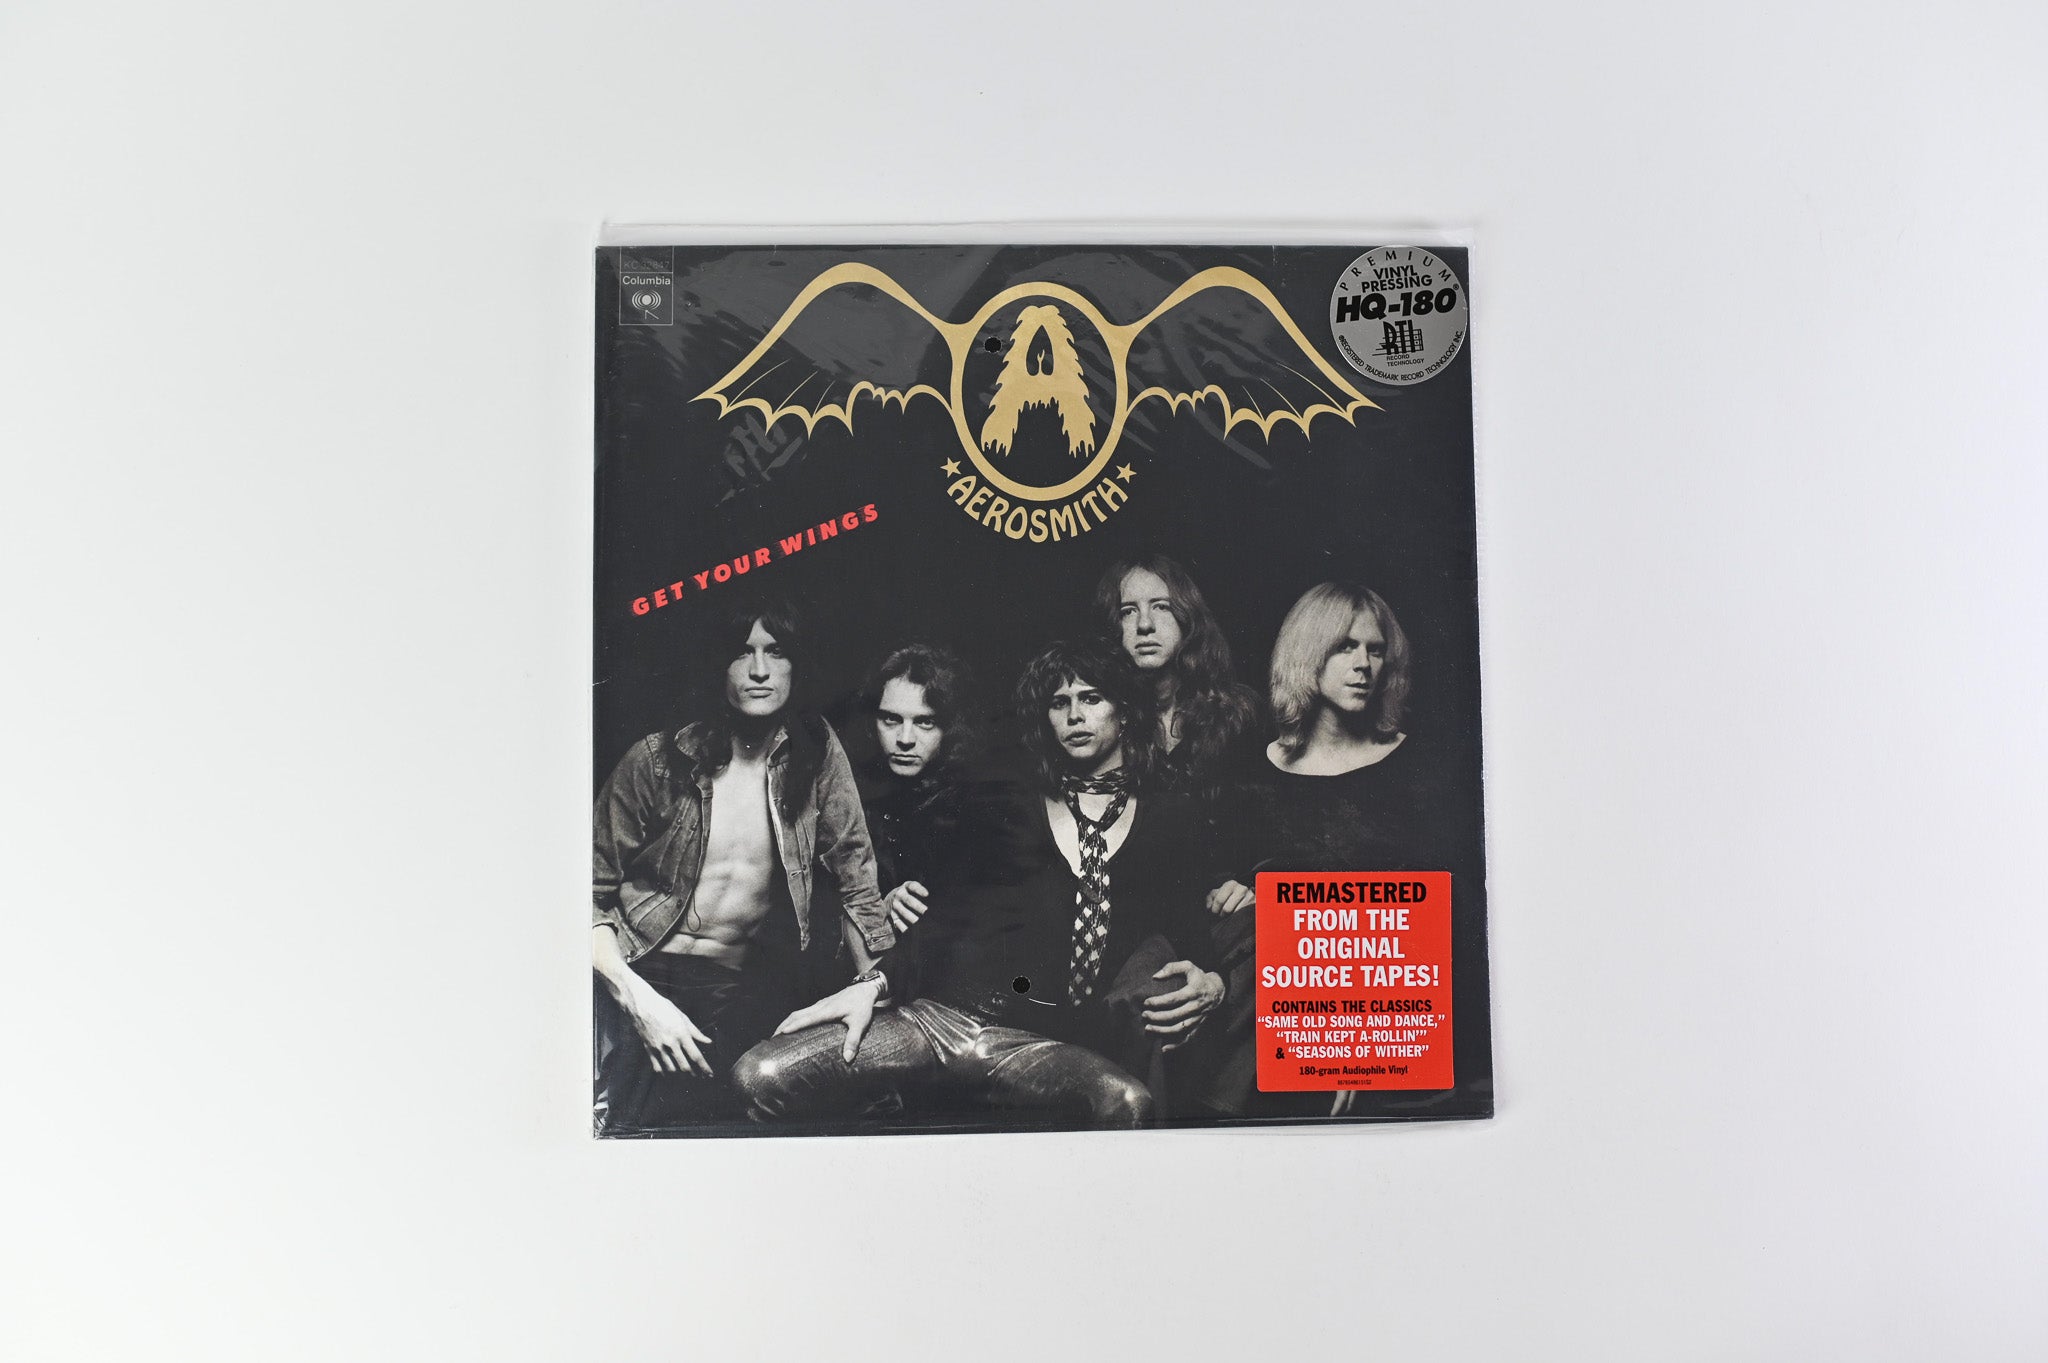 Aerosmith - Get Your Wings on Columbia 180 Gram Reissue